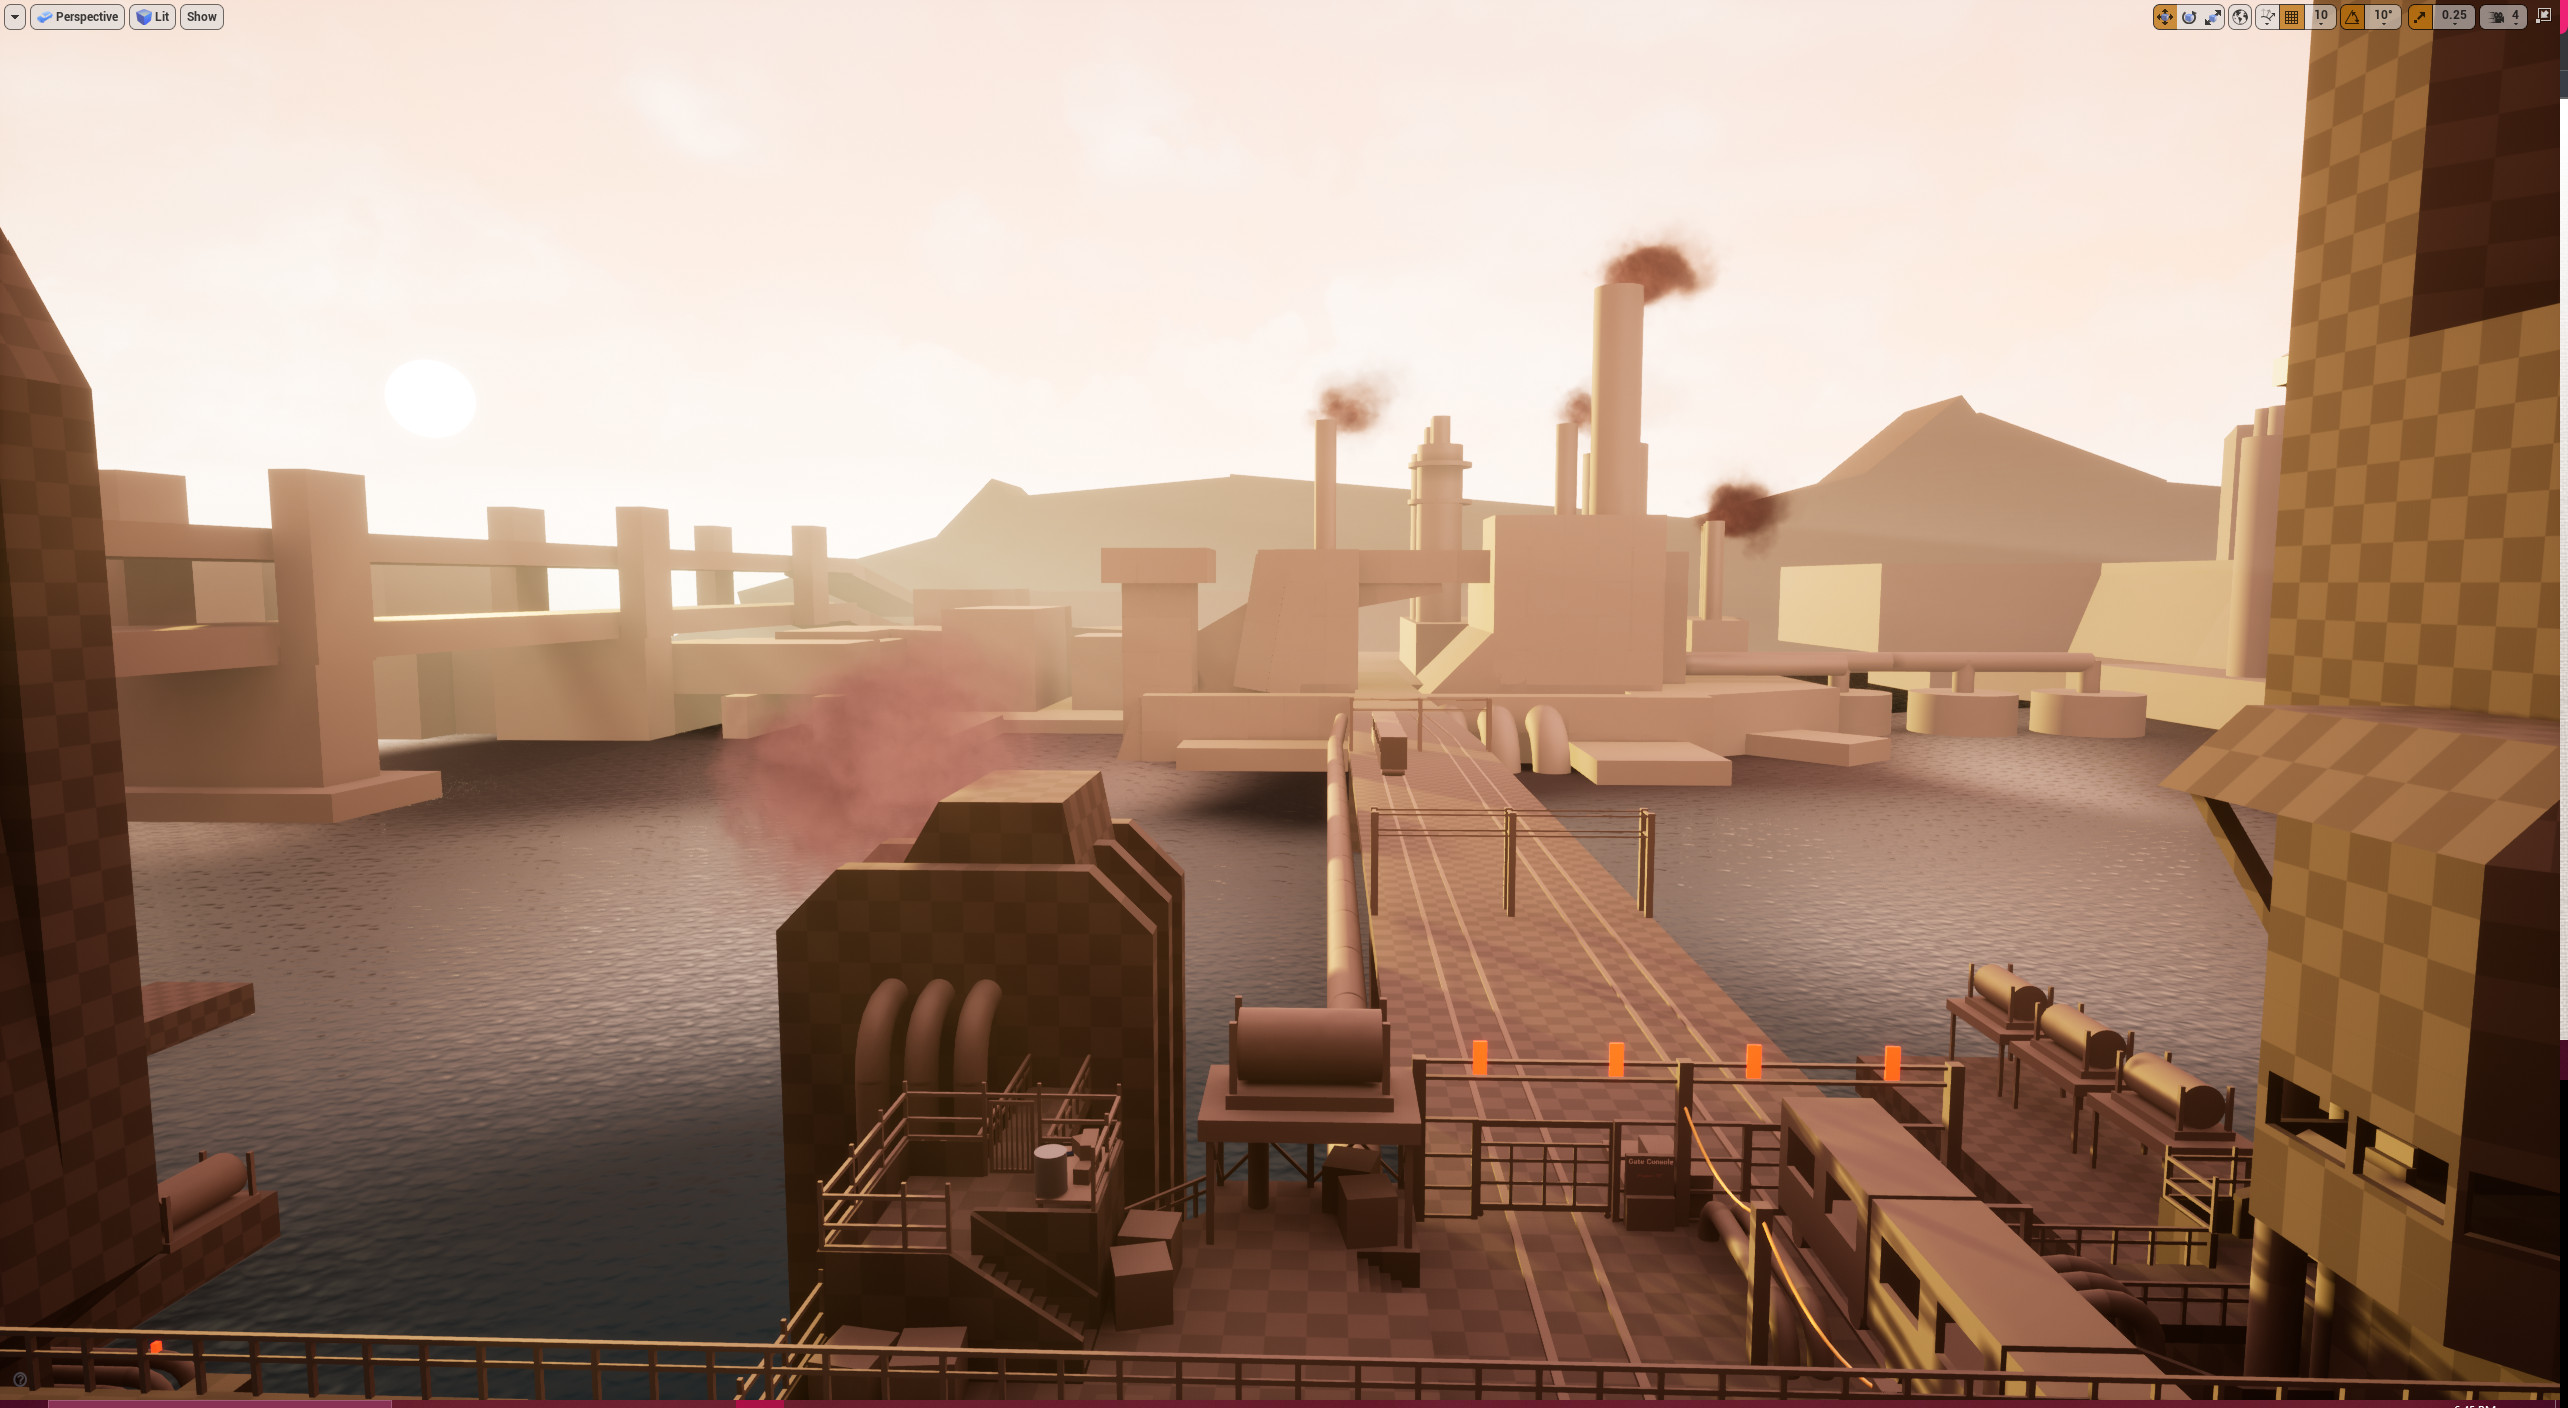 A shot of the refinery and surrounding environment.